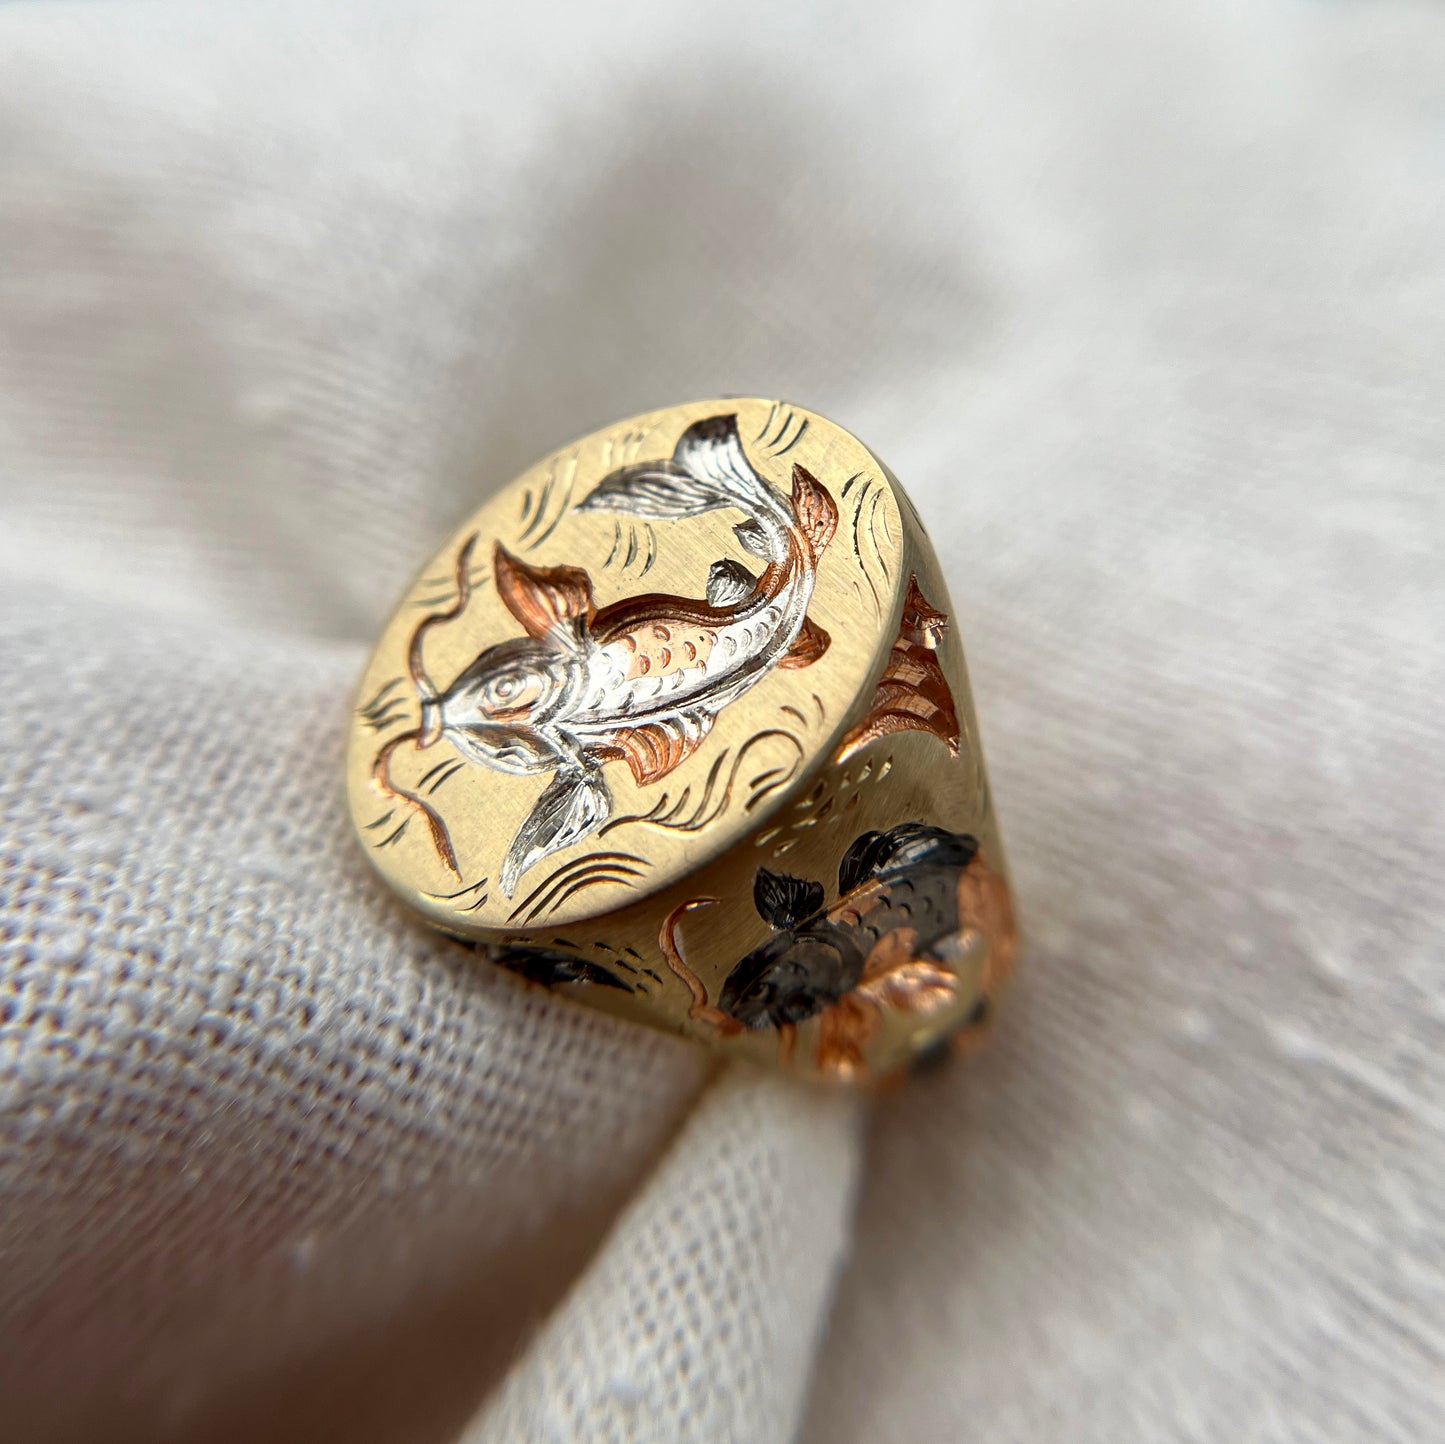 Castro Smith Gold Signet Ring. Carp Signet ring with e=hand engraved carps throughout the ring. The ring has wave and water engraved details. 